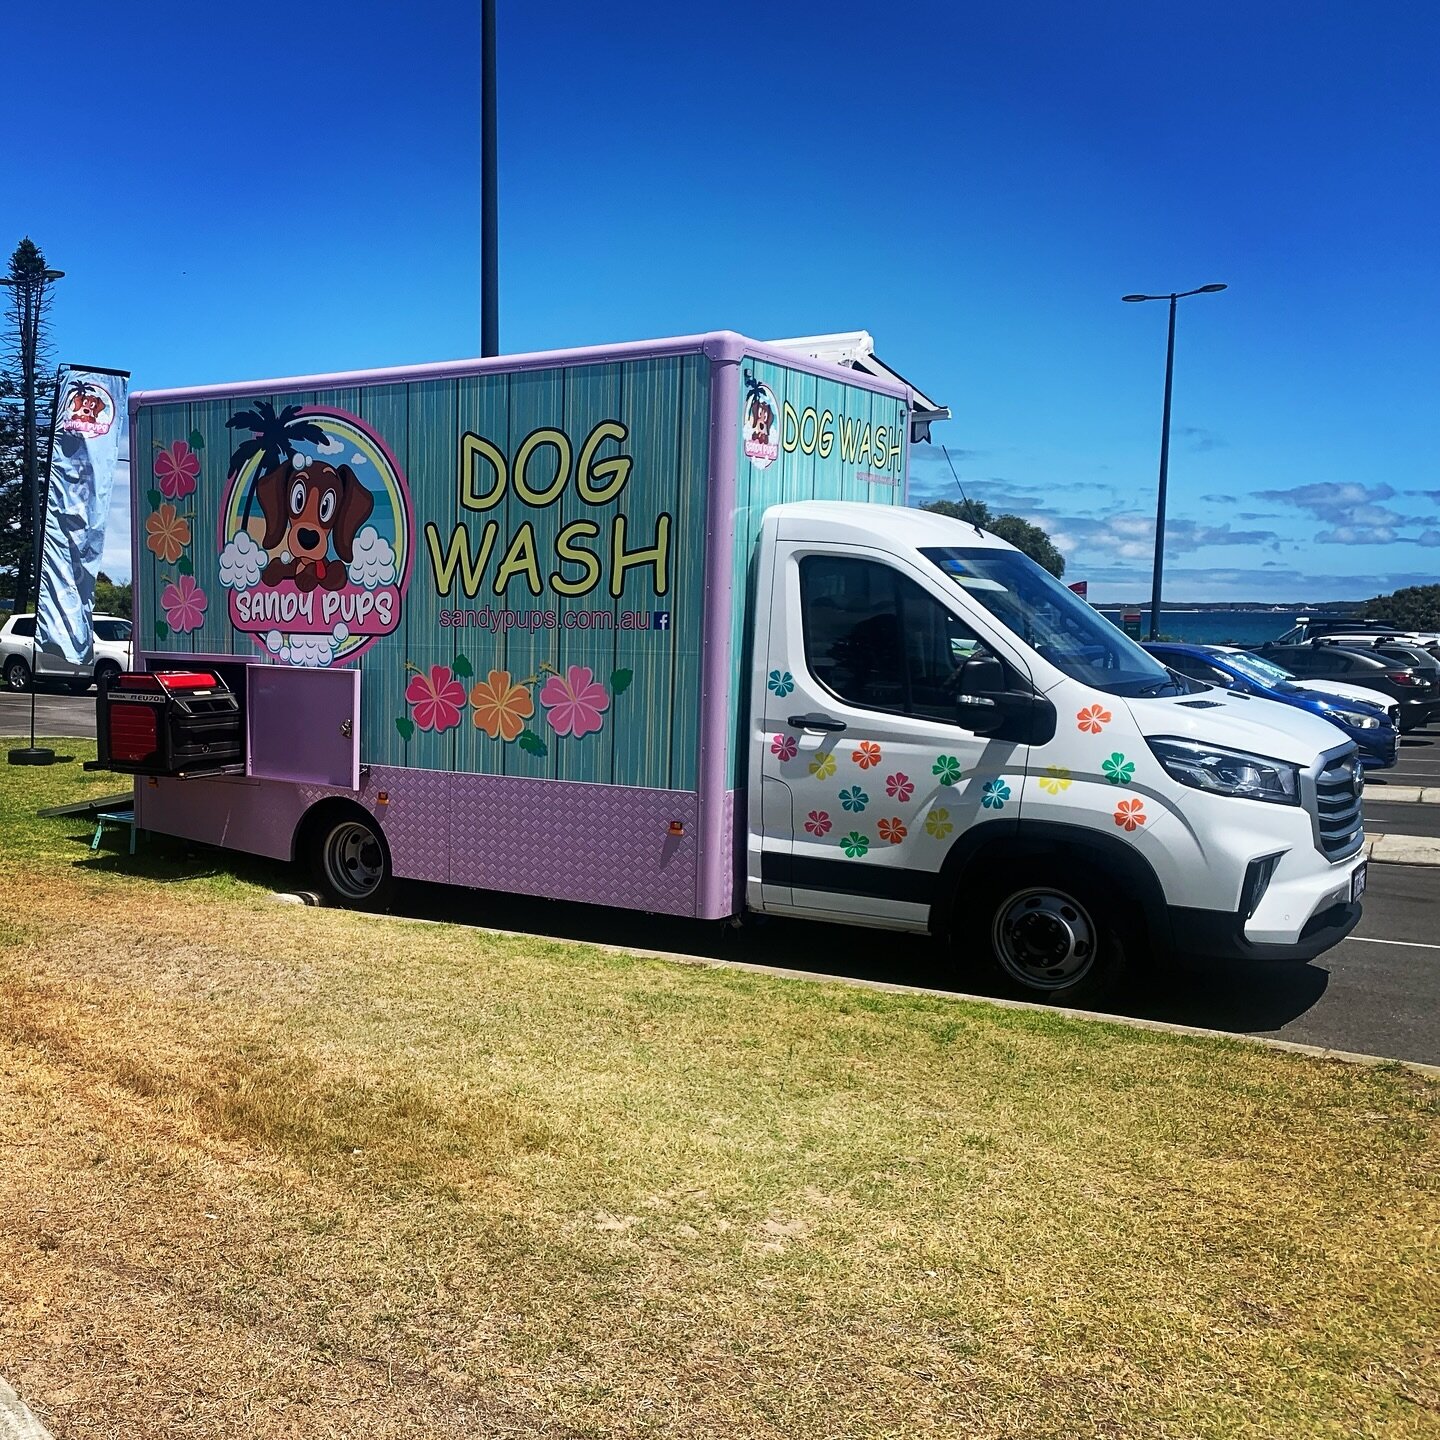 Super cute dog wash @sandy__pups spotted beachside by Cee &amp; See 🐶💕 Perfect for all the fur babies staying at the park 💗
.
#ceeandsee #seaside #beachlife #sandypups #dogslife #rediscoverockingham #rockingham #seeperth #caravanandcampingwa #lets